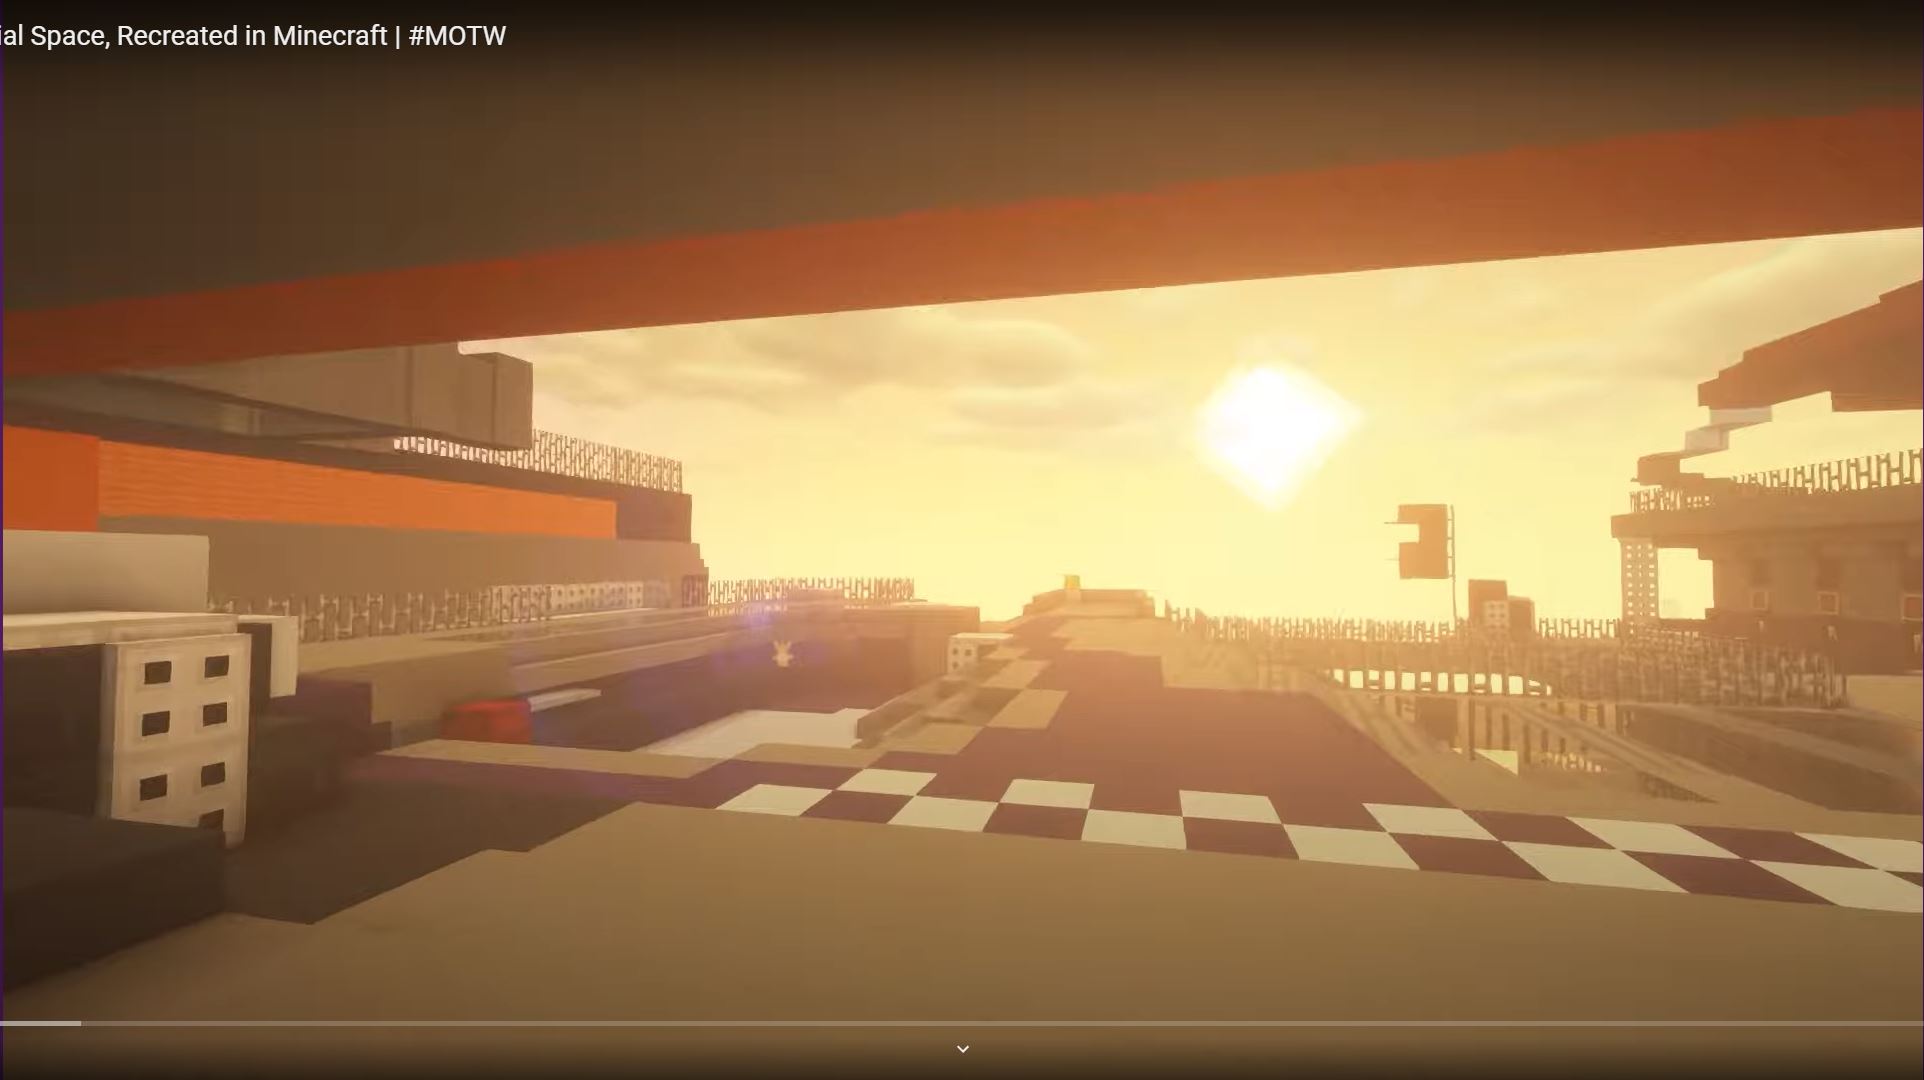 YouTuber EetzJosh Has Meticulously Recreated The Destiny 2 Tower In Minecraft